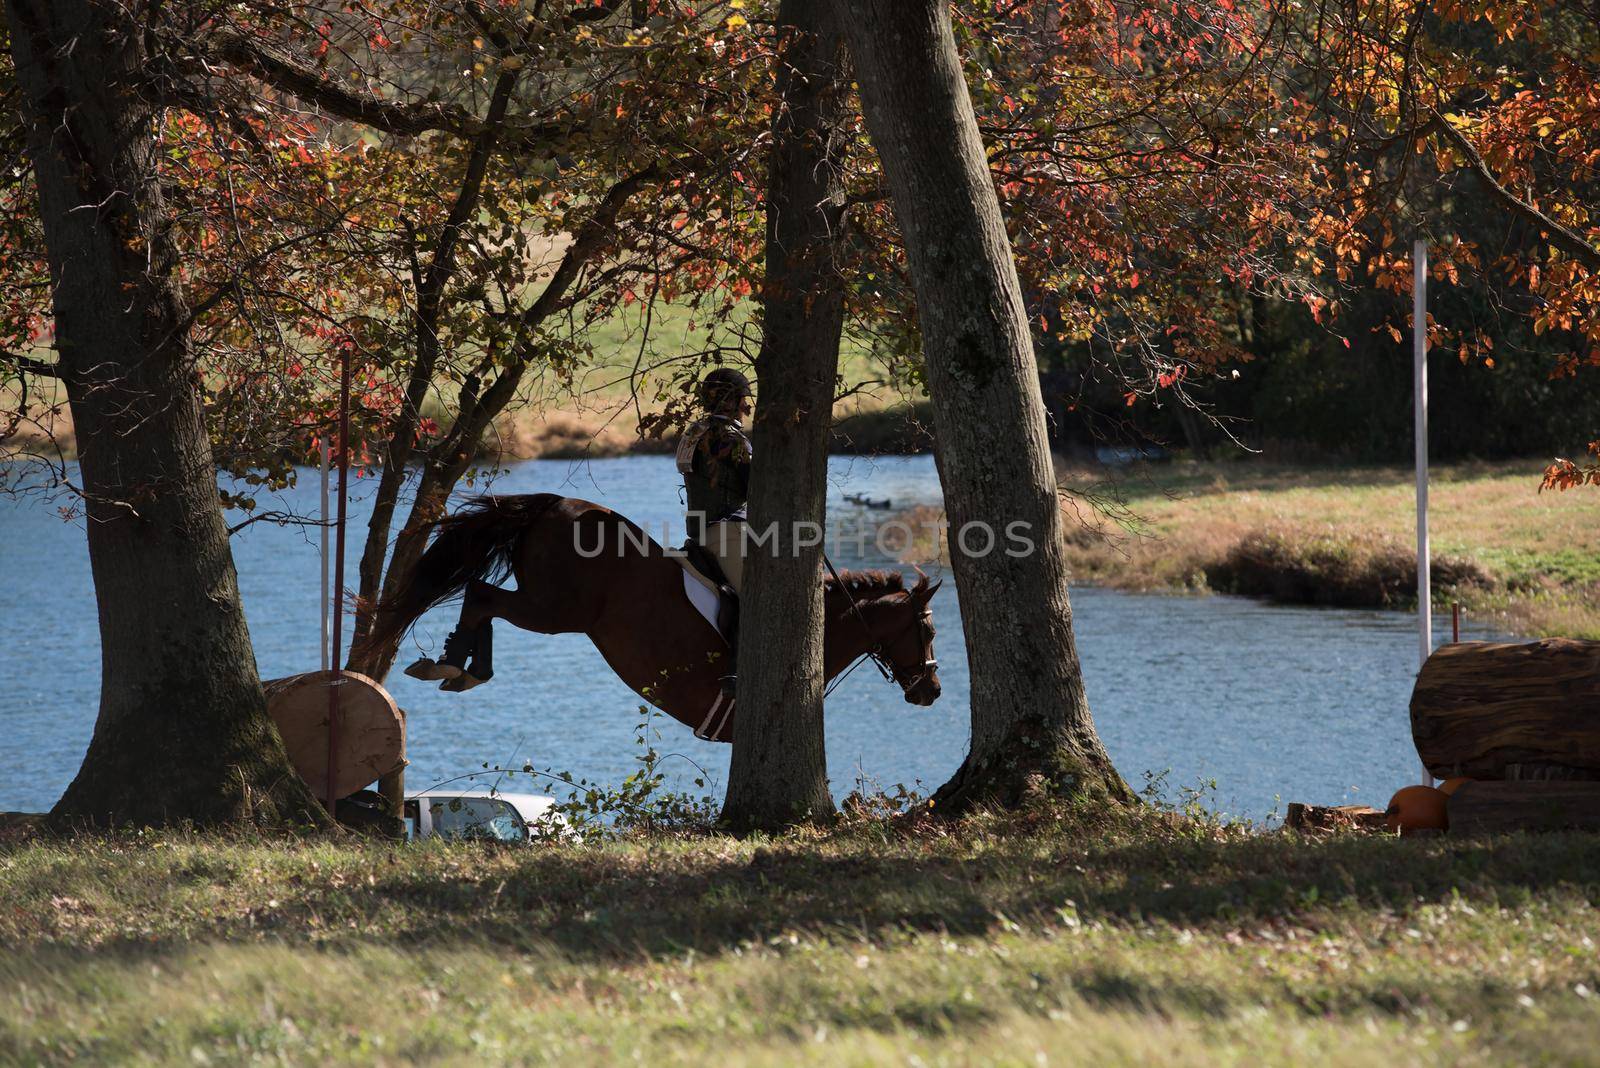 Equestrian competition photos including cross country jumping horse riders